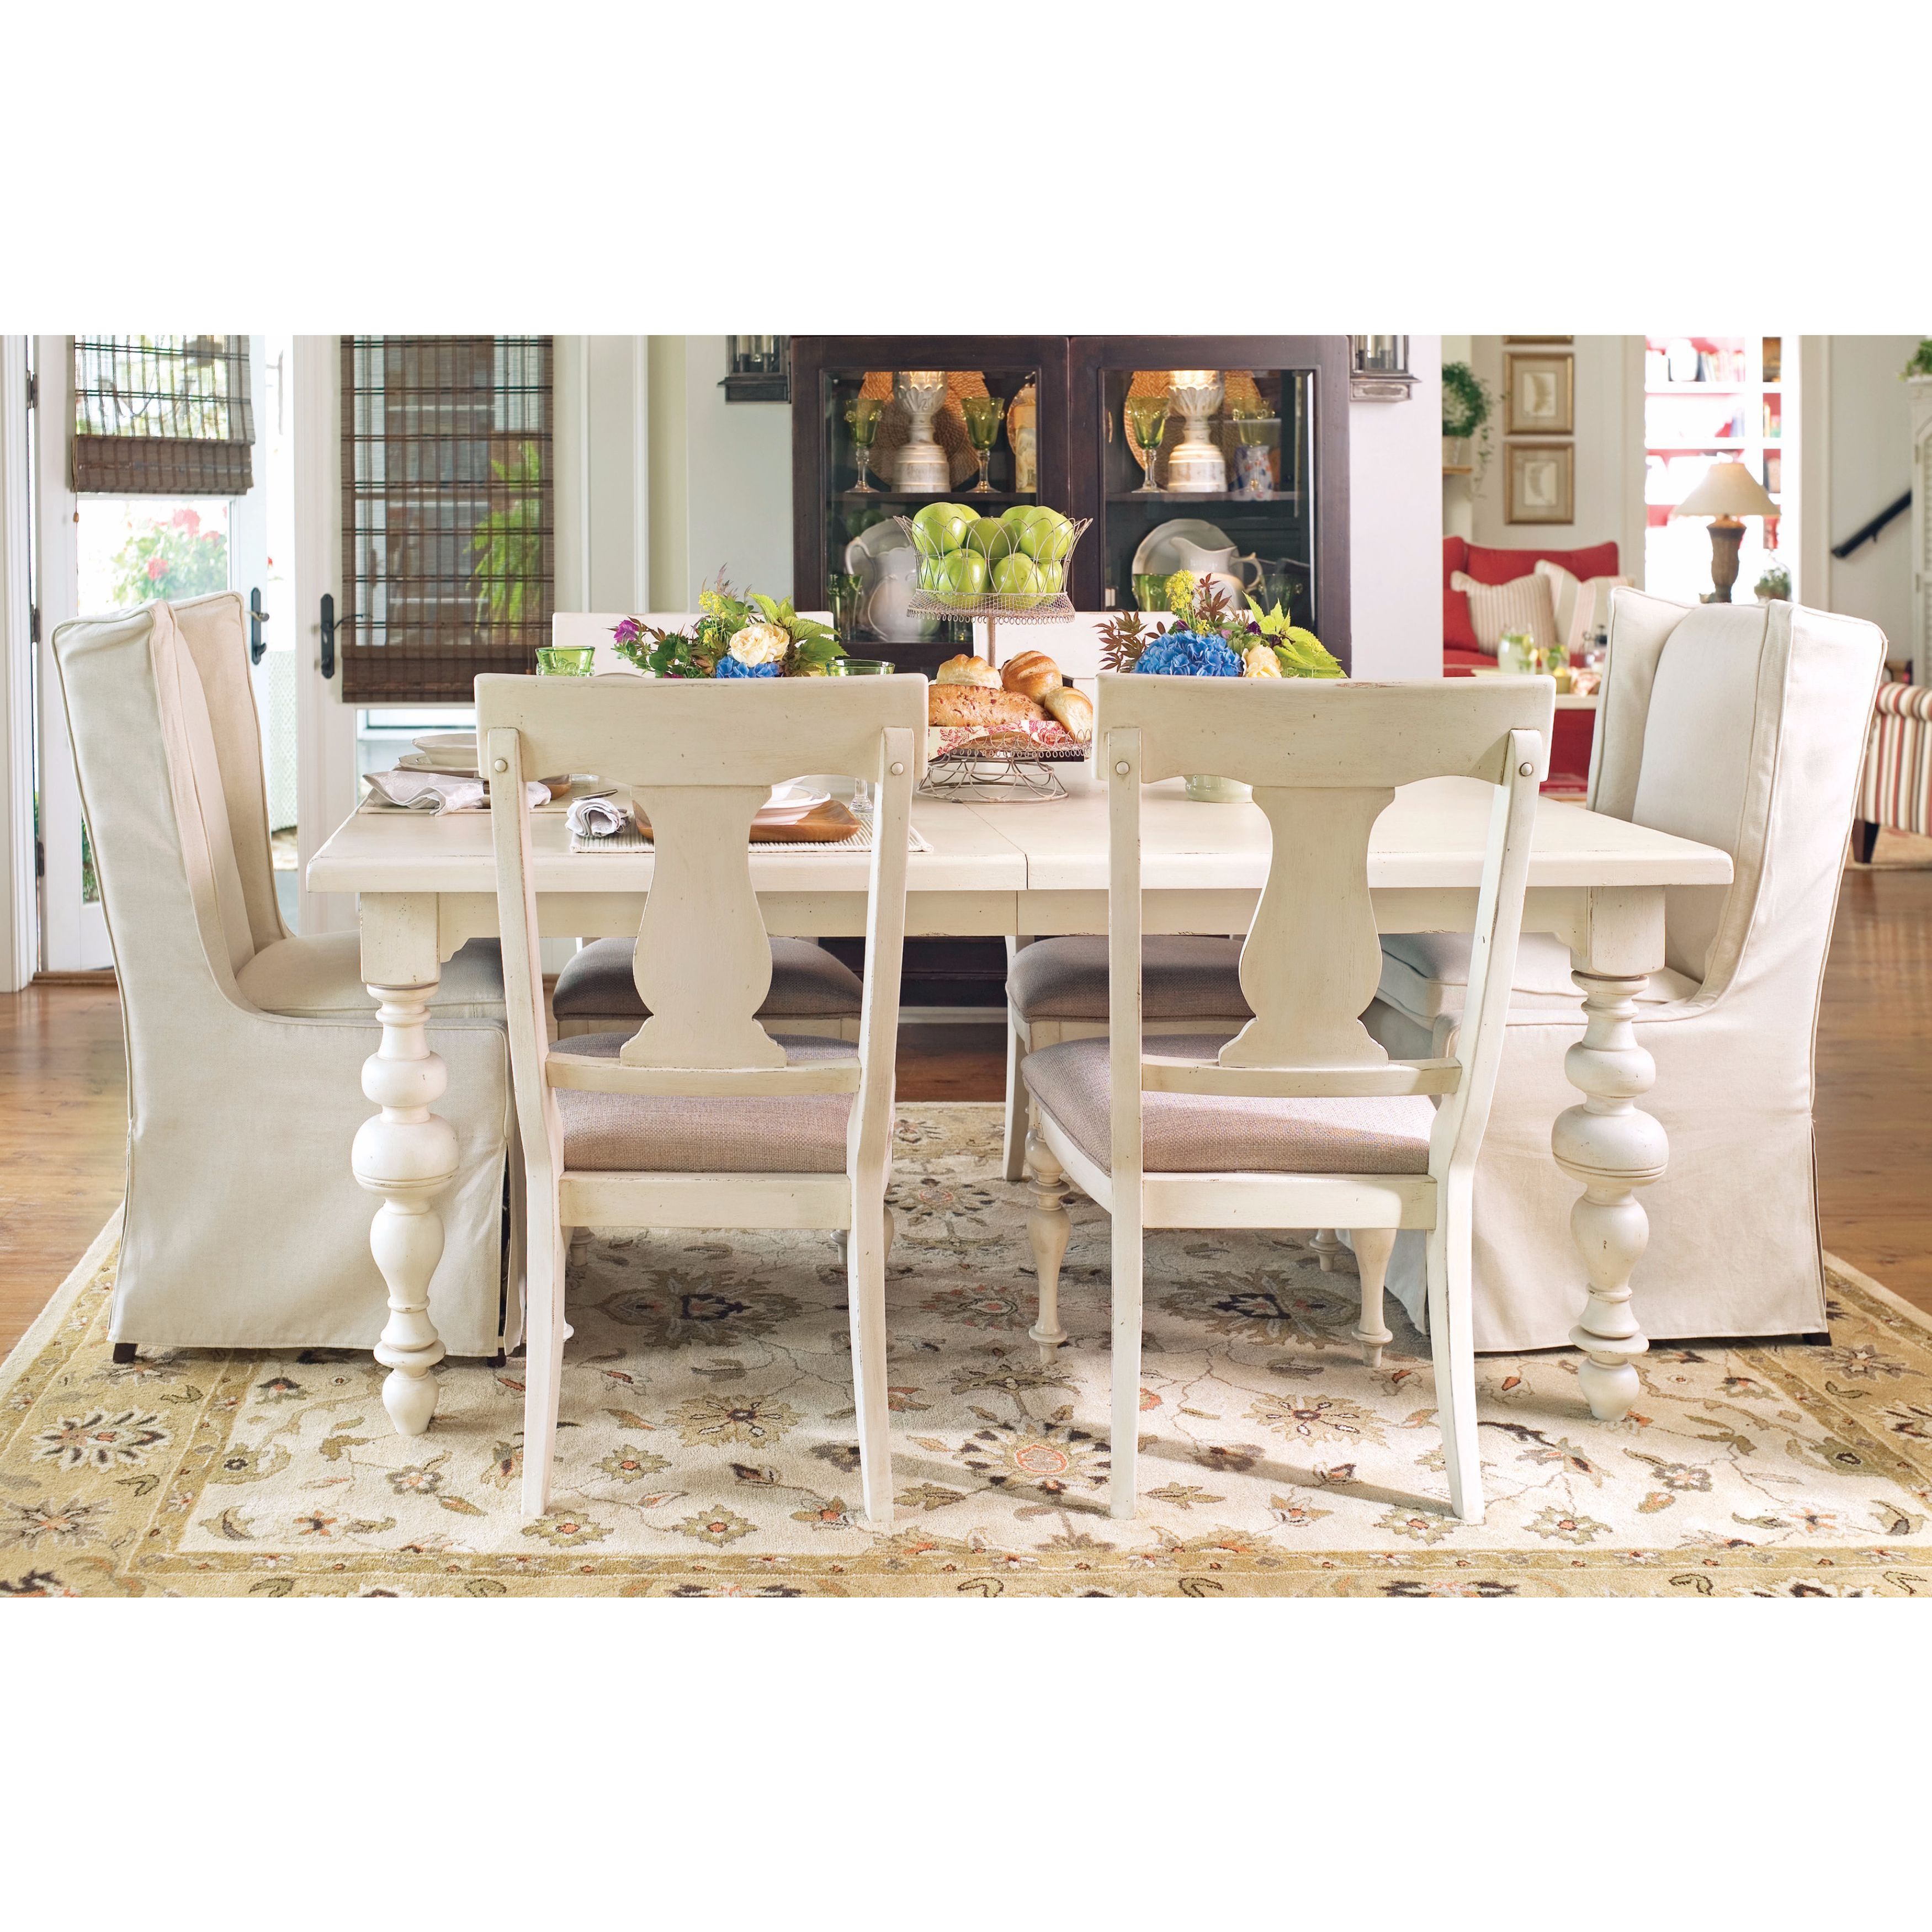 Paula Deen Dining Room Table       - Paula S Dining Table In Tobacco Side Chairs Dining Paula Deen Dining Table Dining Table In Kitchen : Discover paula deen bedroom furniture sets to create a chic oasis in your master suite, living room furniture that will warm up the family, and dining room pieces that are perfect for entertaining guests and loved ones.